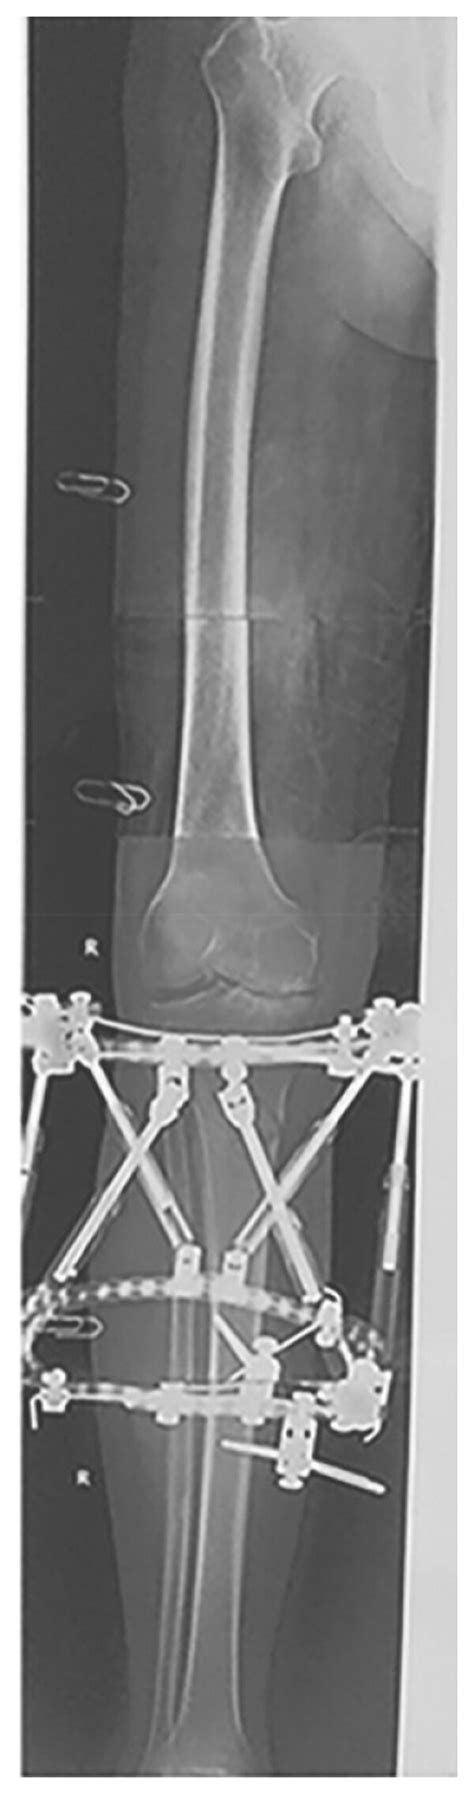 A 53 Year Old Male Suffered With Knee Osteoarthritis Combined With